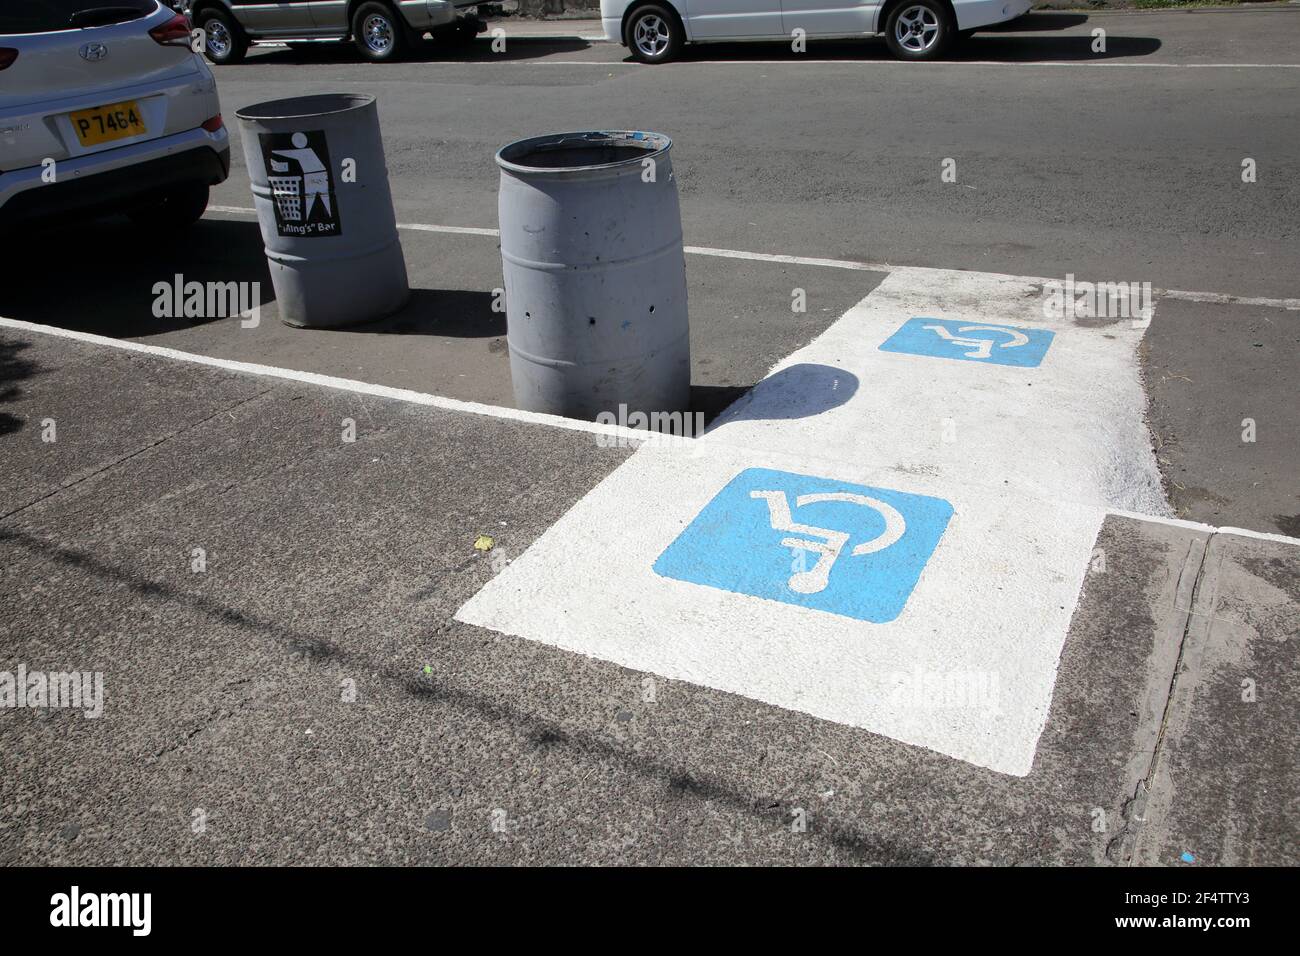 St George's Grenada Disabled Parking Bay and Trash Cans Stock Photo